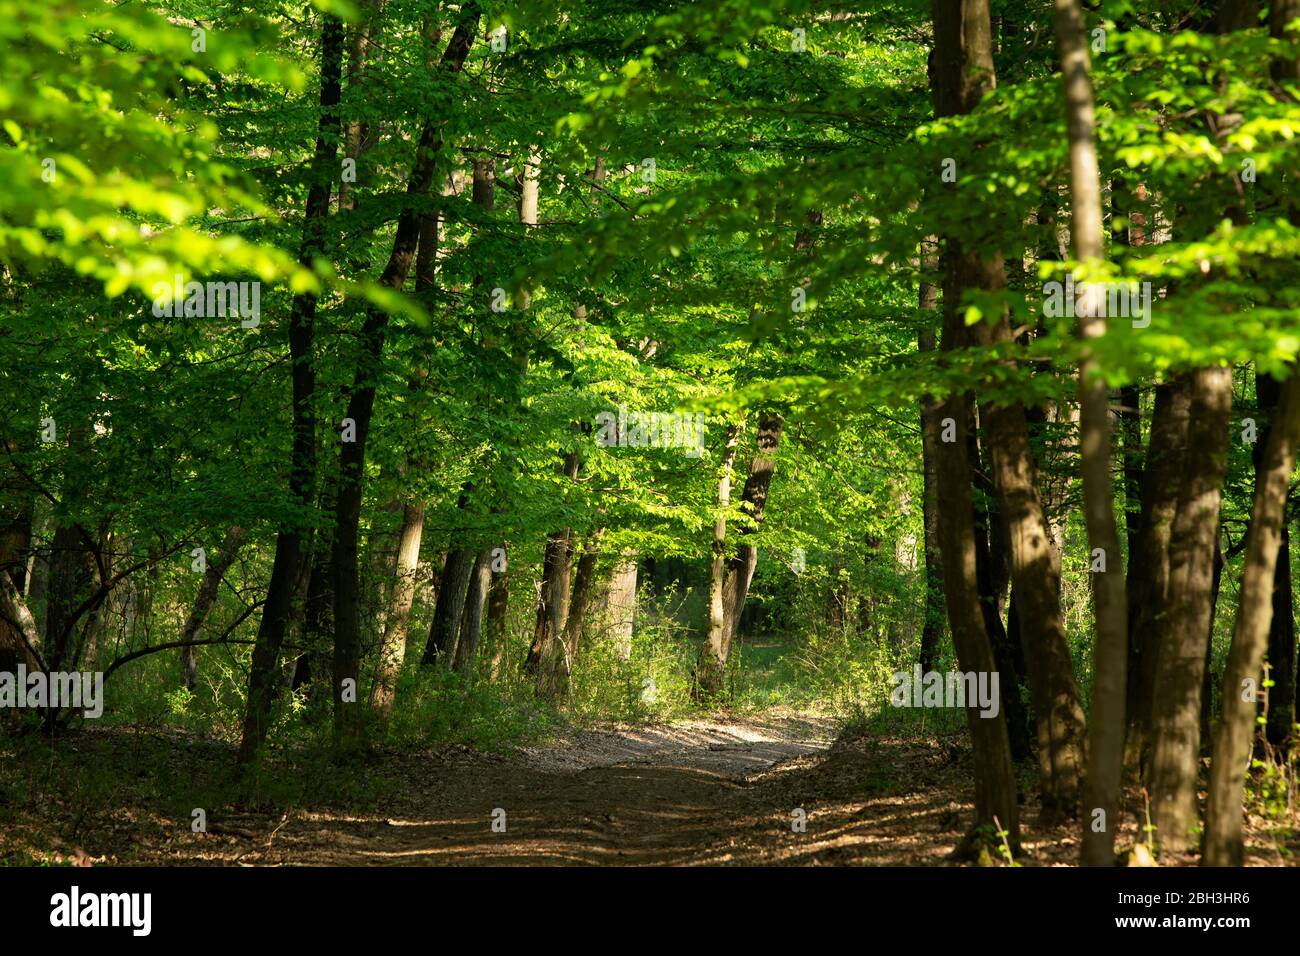 Green forest in spring time Stock Photo